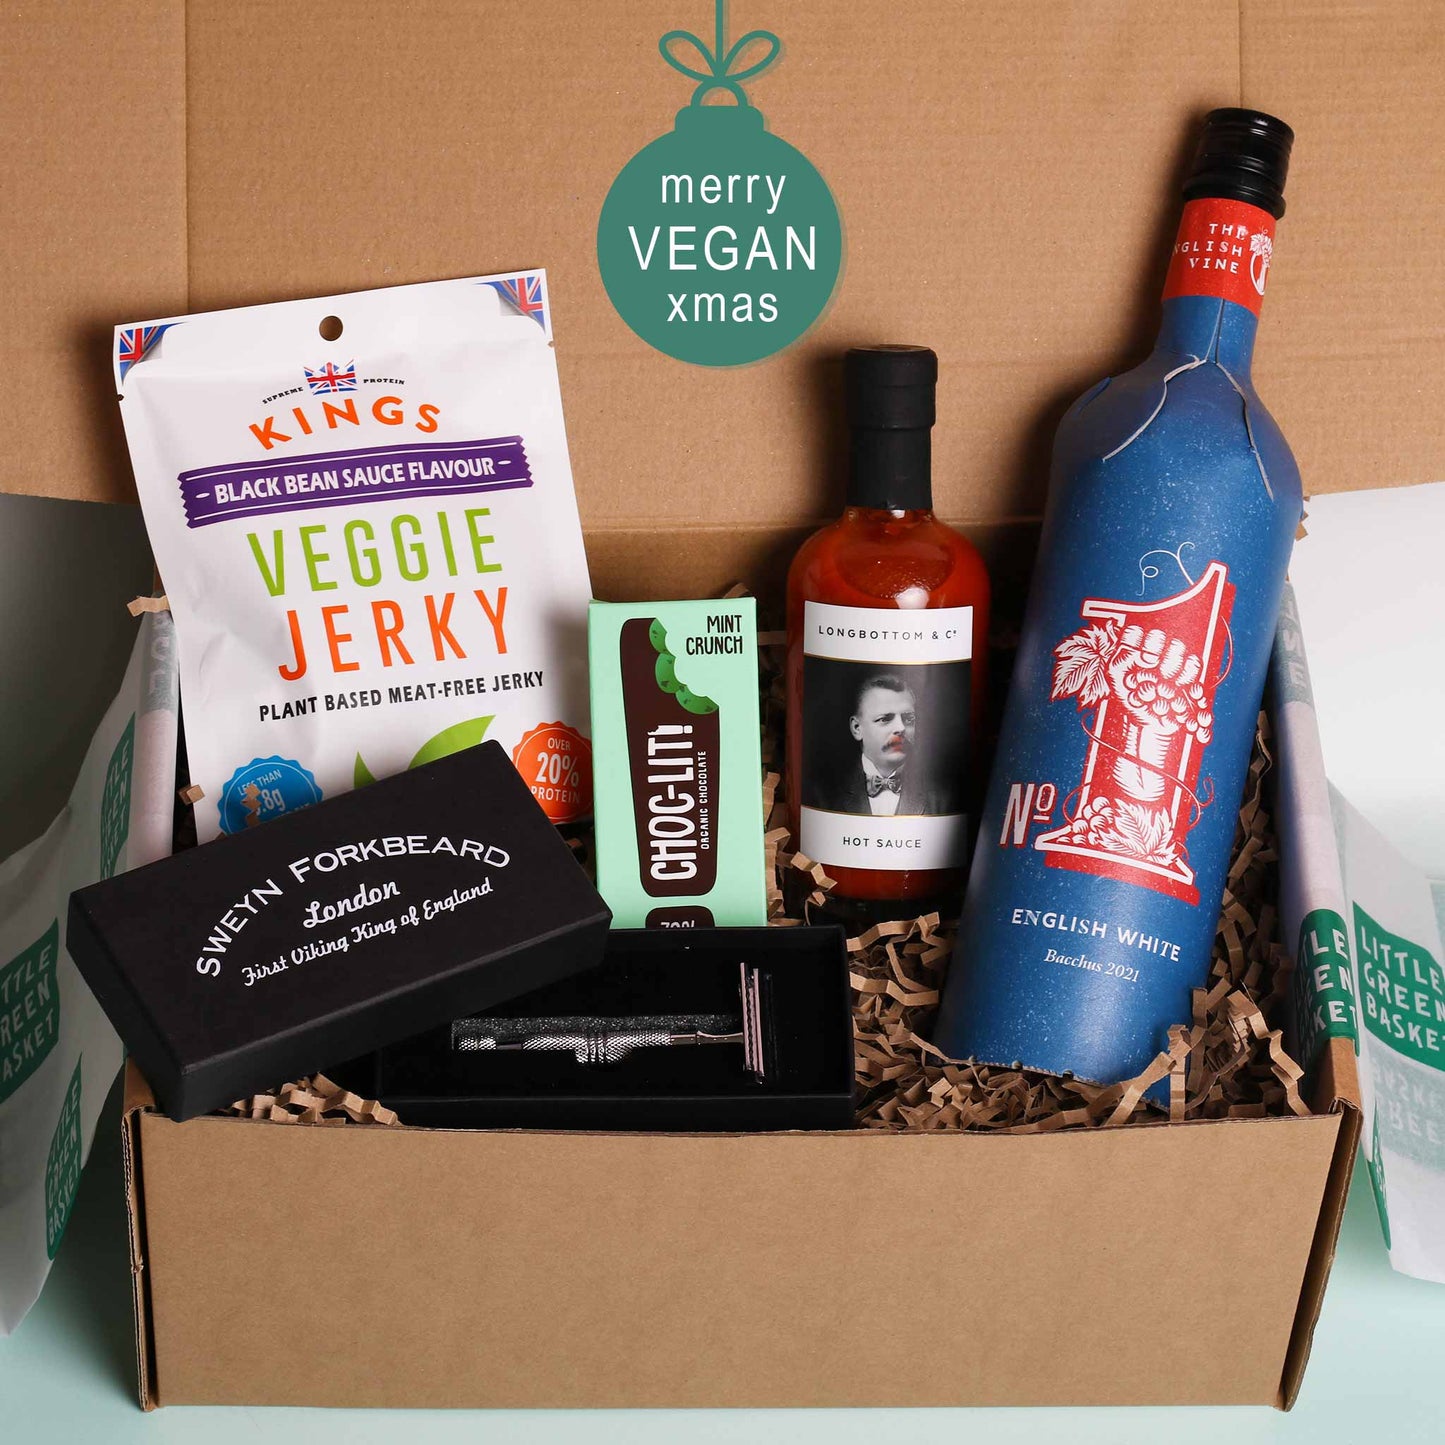 Large Vegan Gift Box - for Him. Wonderful gift for that special someone.